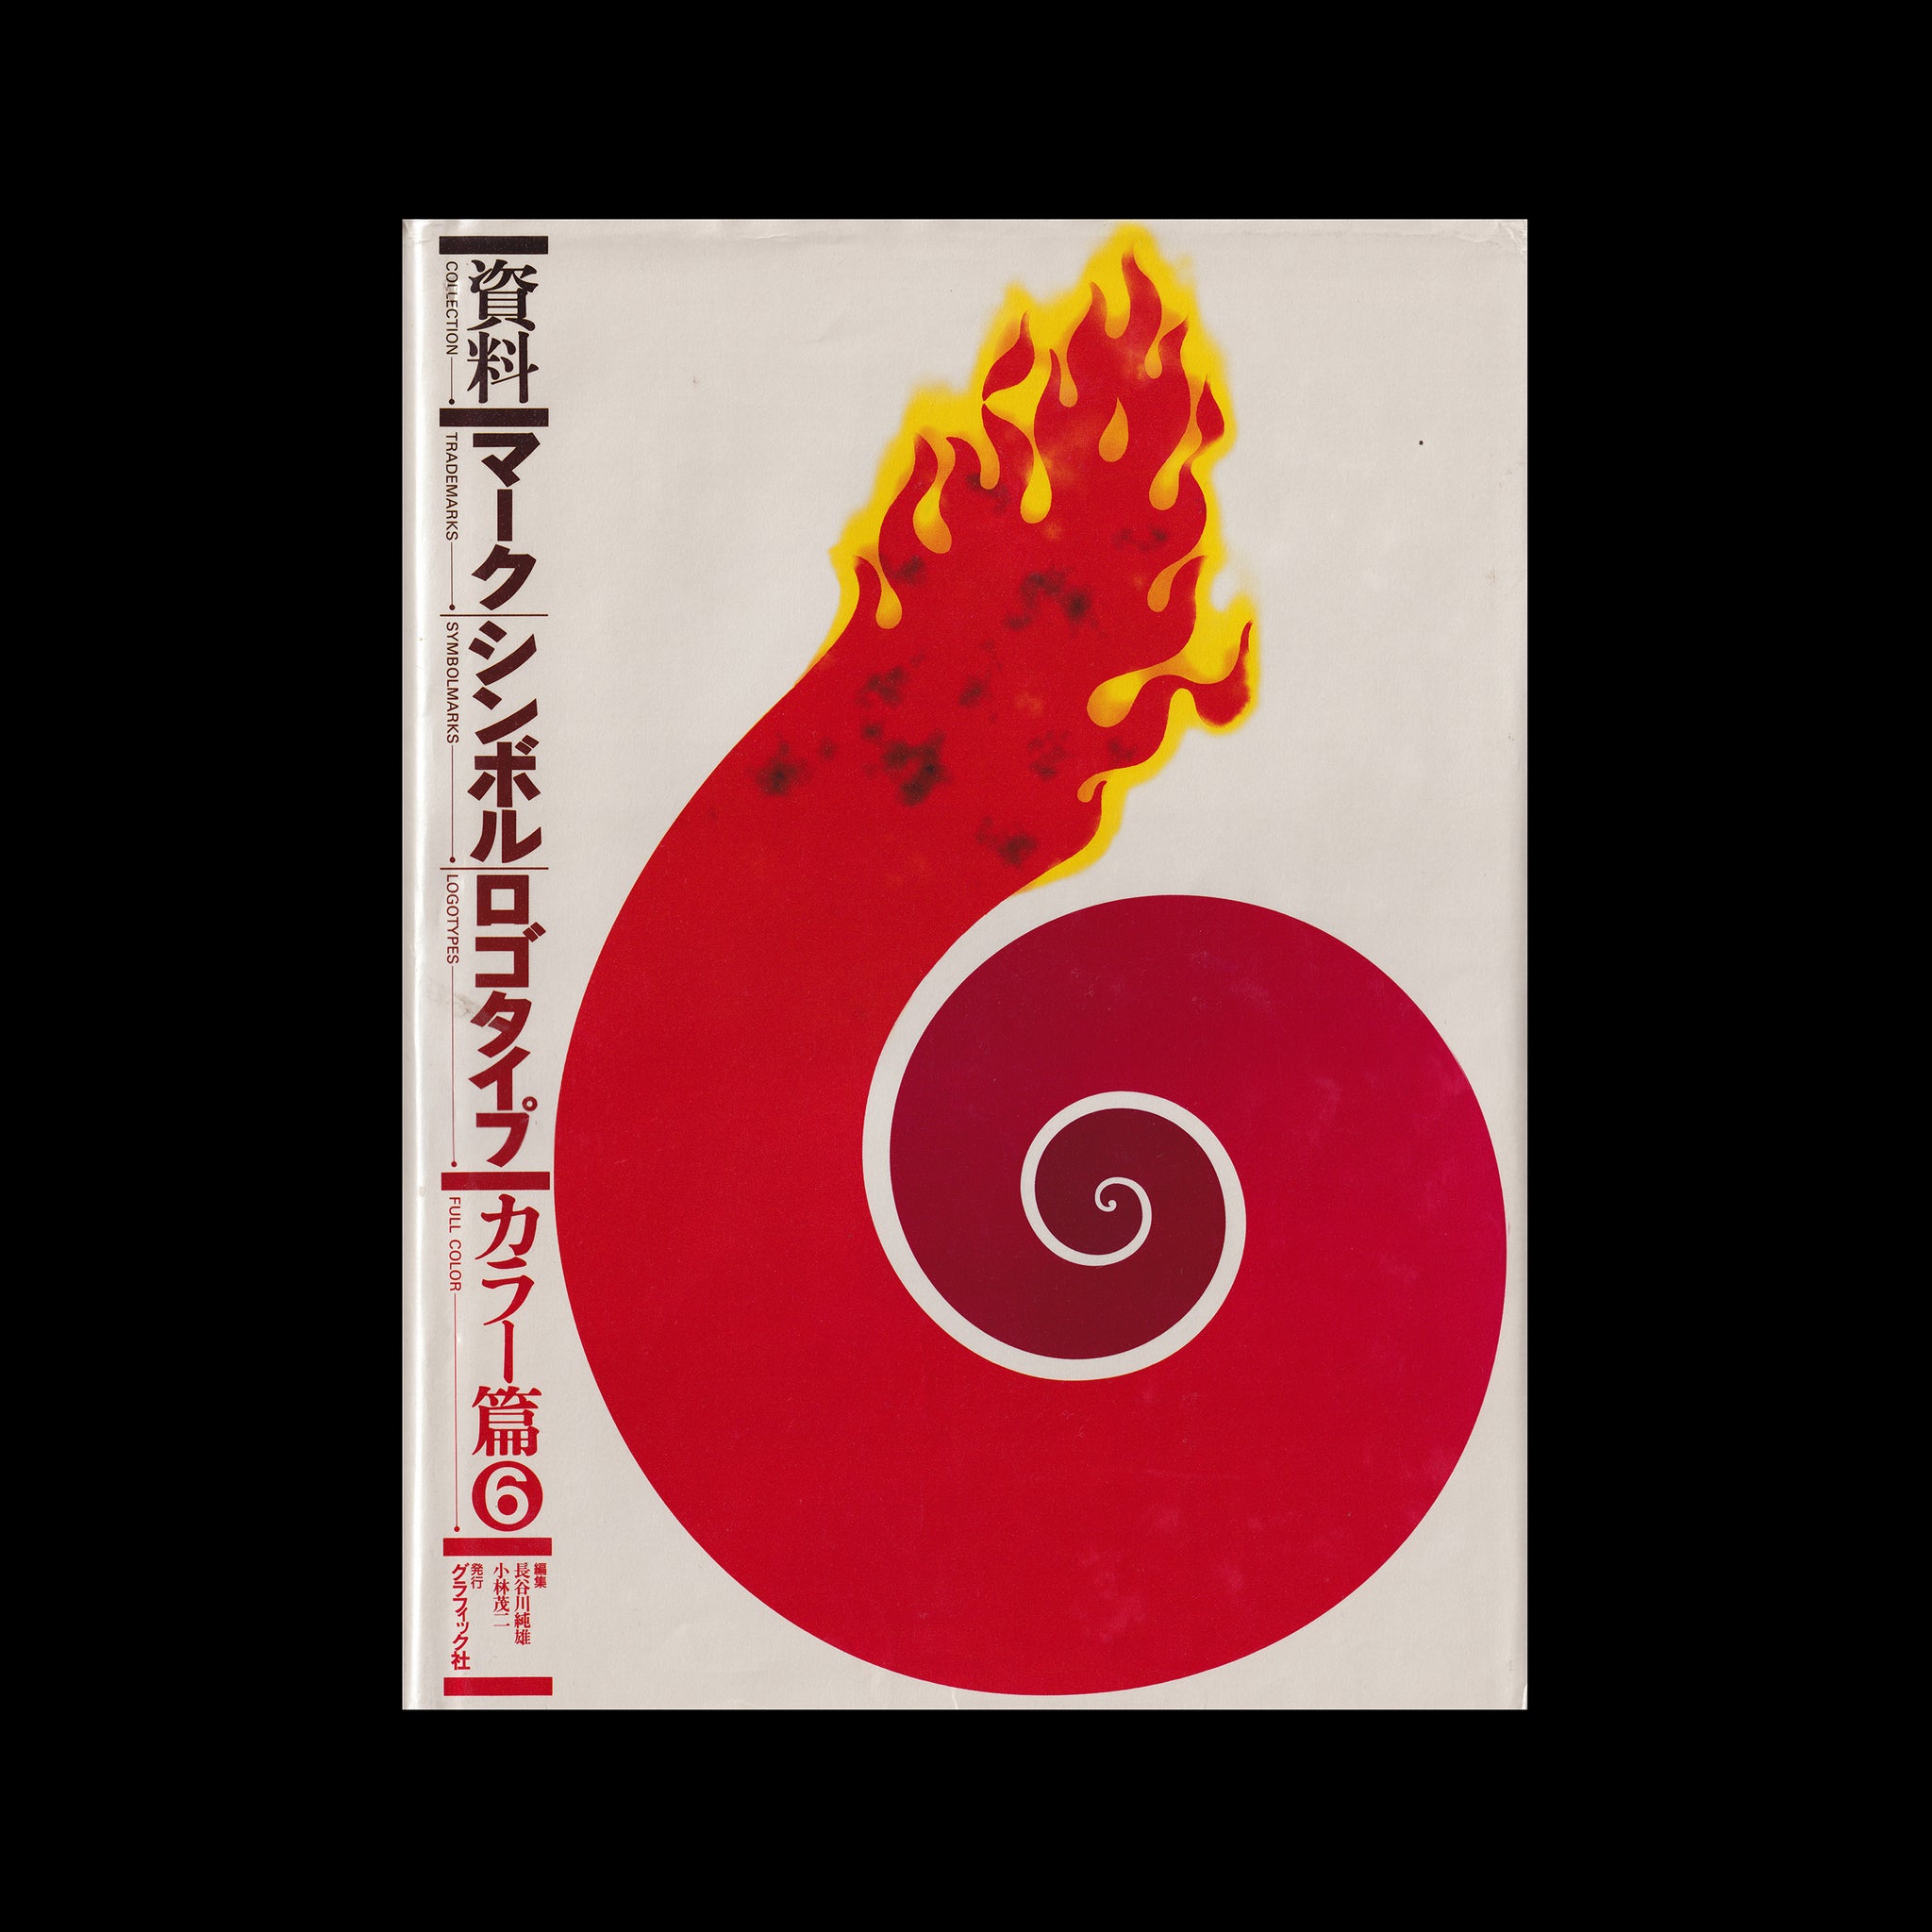 Japan's Trademarks and Logotypes in Full Colour Part 6, 1995